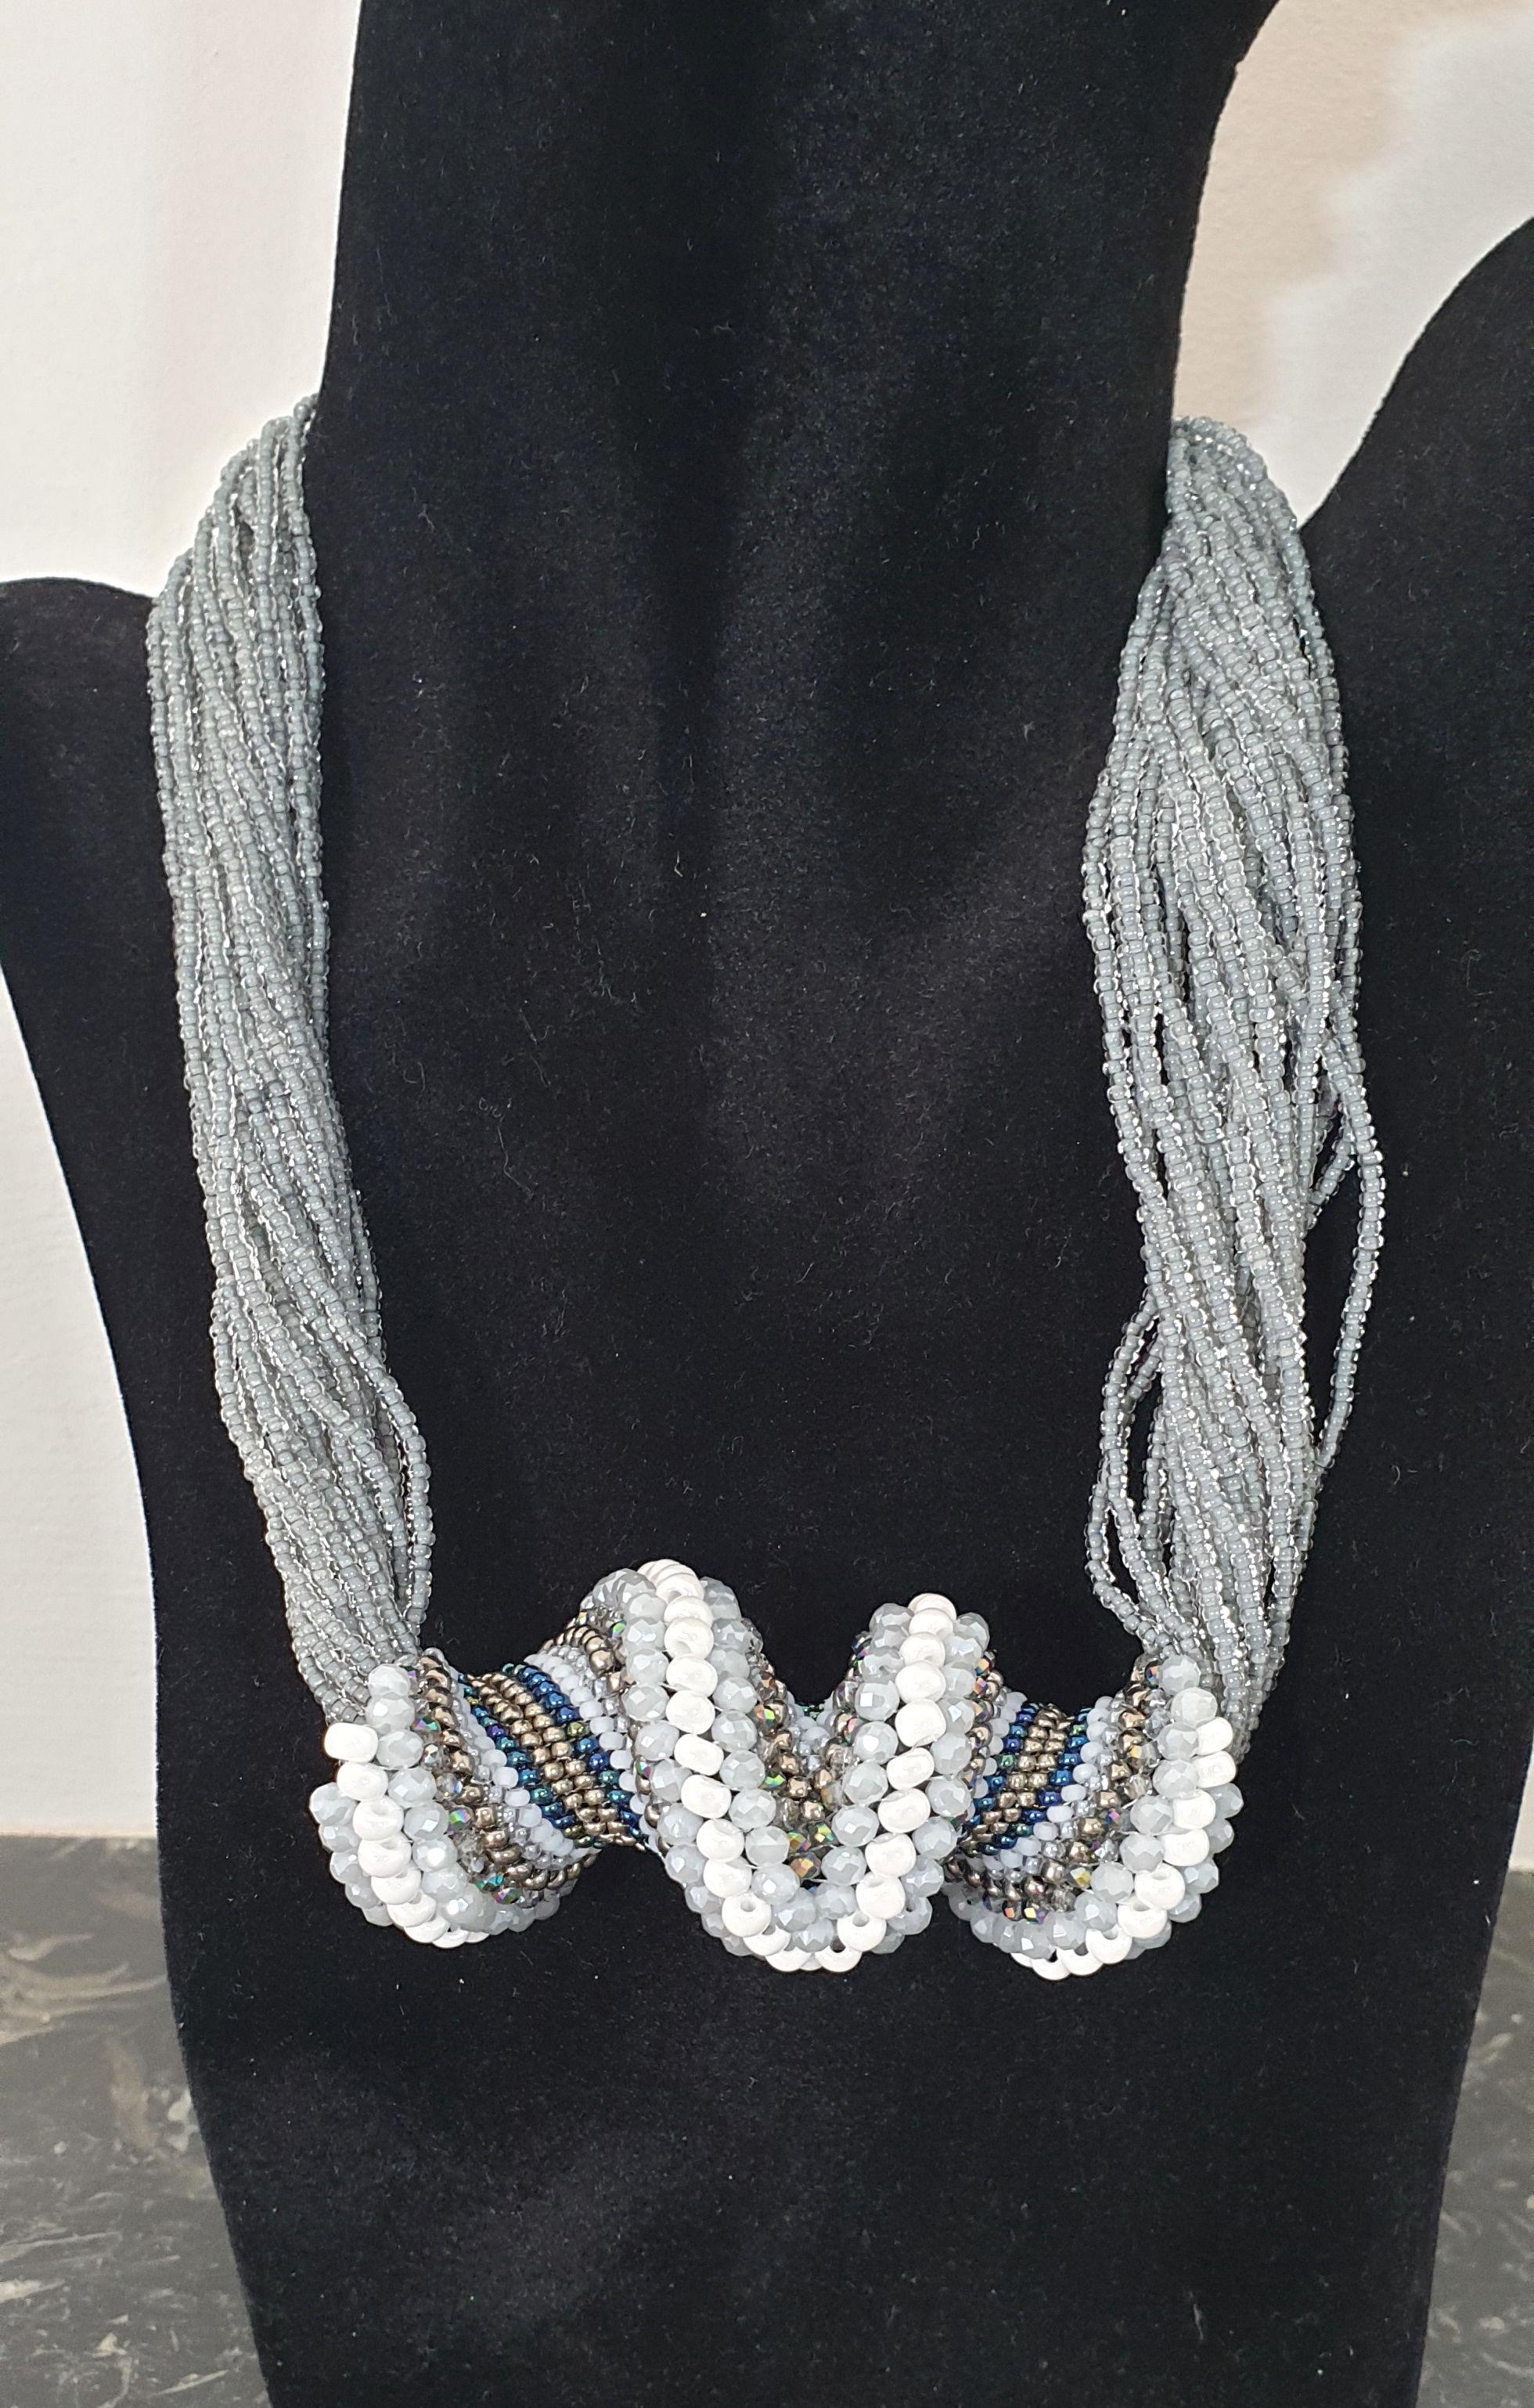 Gray, white & blue tones multi strands Murano glass beads fashion necklace.
Unique hand made by artist Paola B.  in Venise,  Italy, 2010s.
Made of: hand colored Murano glass beads, silver micro beads, and Swarovski cut glass beads.
The artist is a